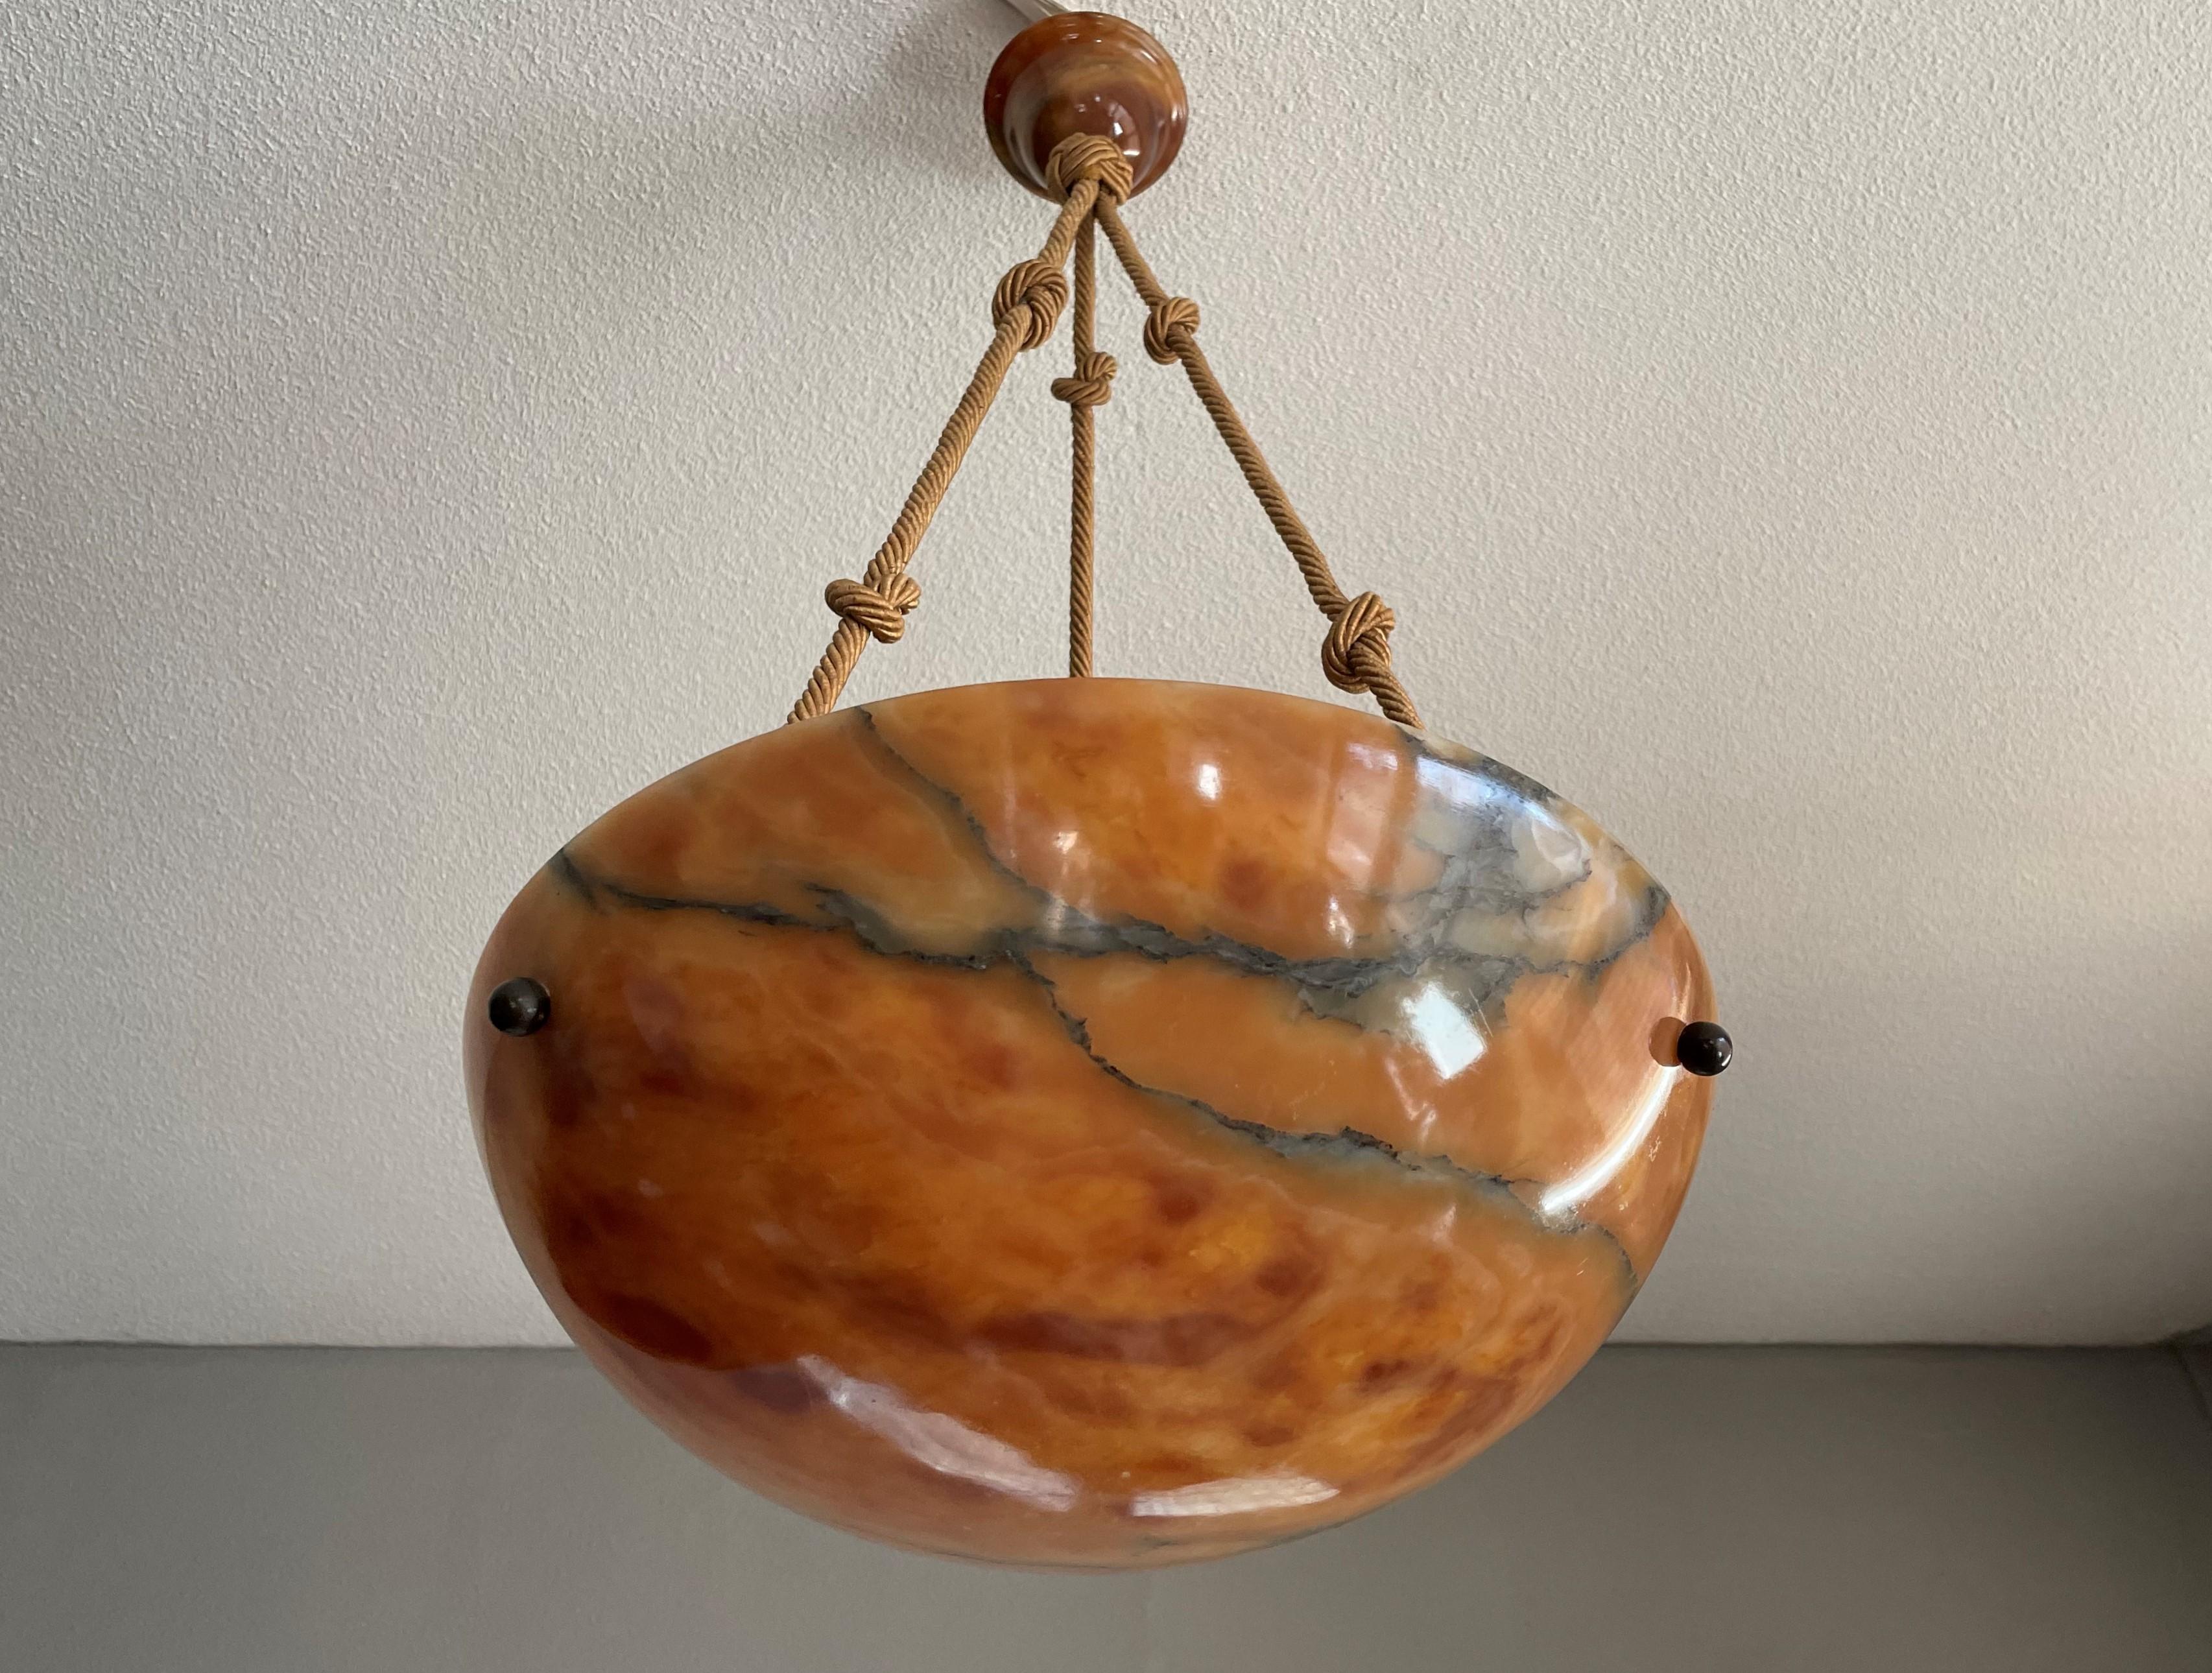 Practical size and beautiful design alabaster chandelier of museum quality and condition.

If you are looking for the best quality and condition antiques only then this incredibly beautiful alabaster pendant could be yours to own, use and enjoy